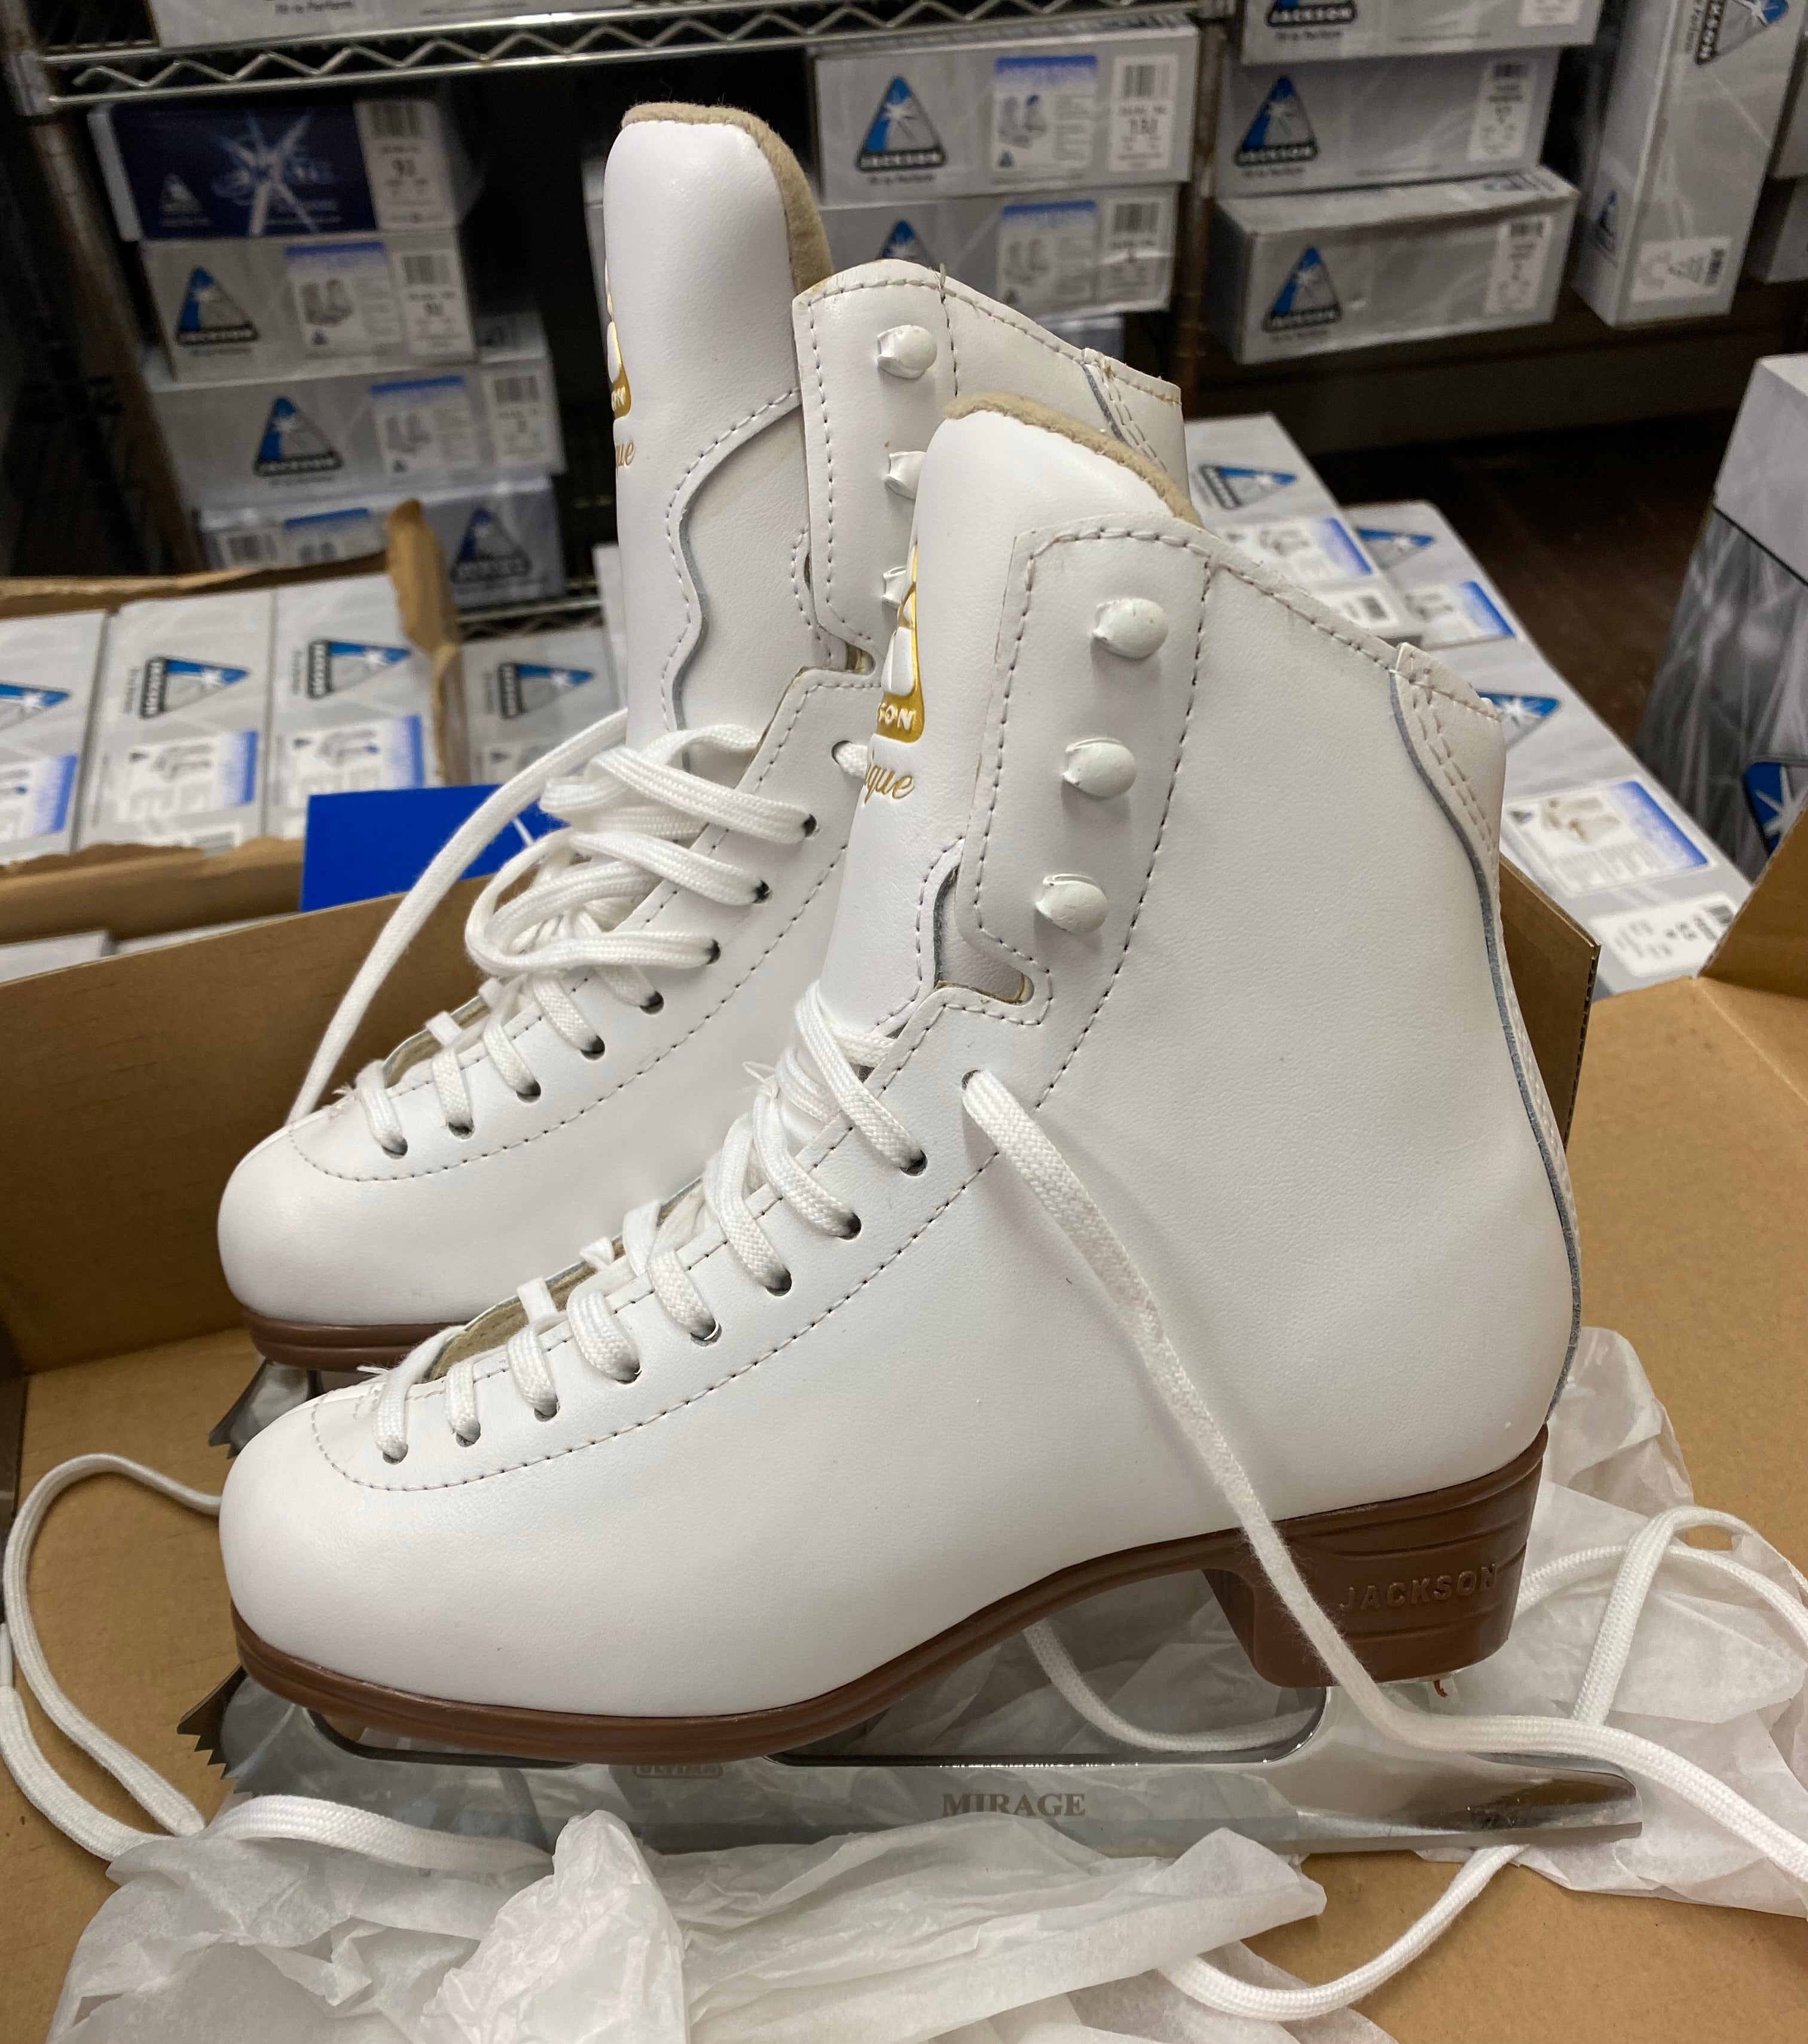 Jackson Ready to Ship Classique Figure Skates | Northern Ice and Dance